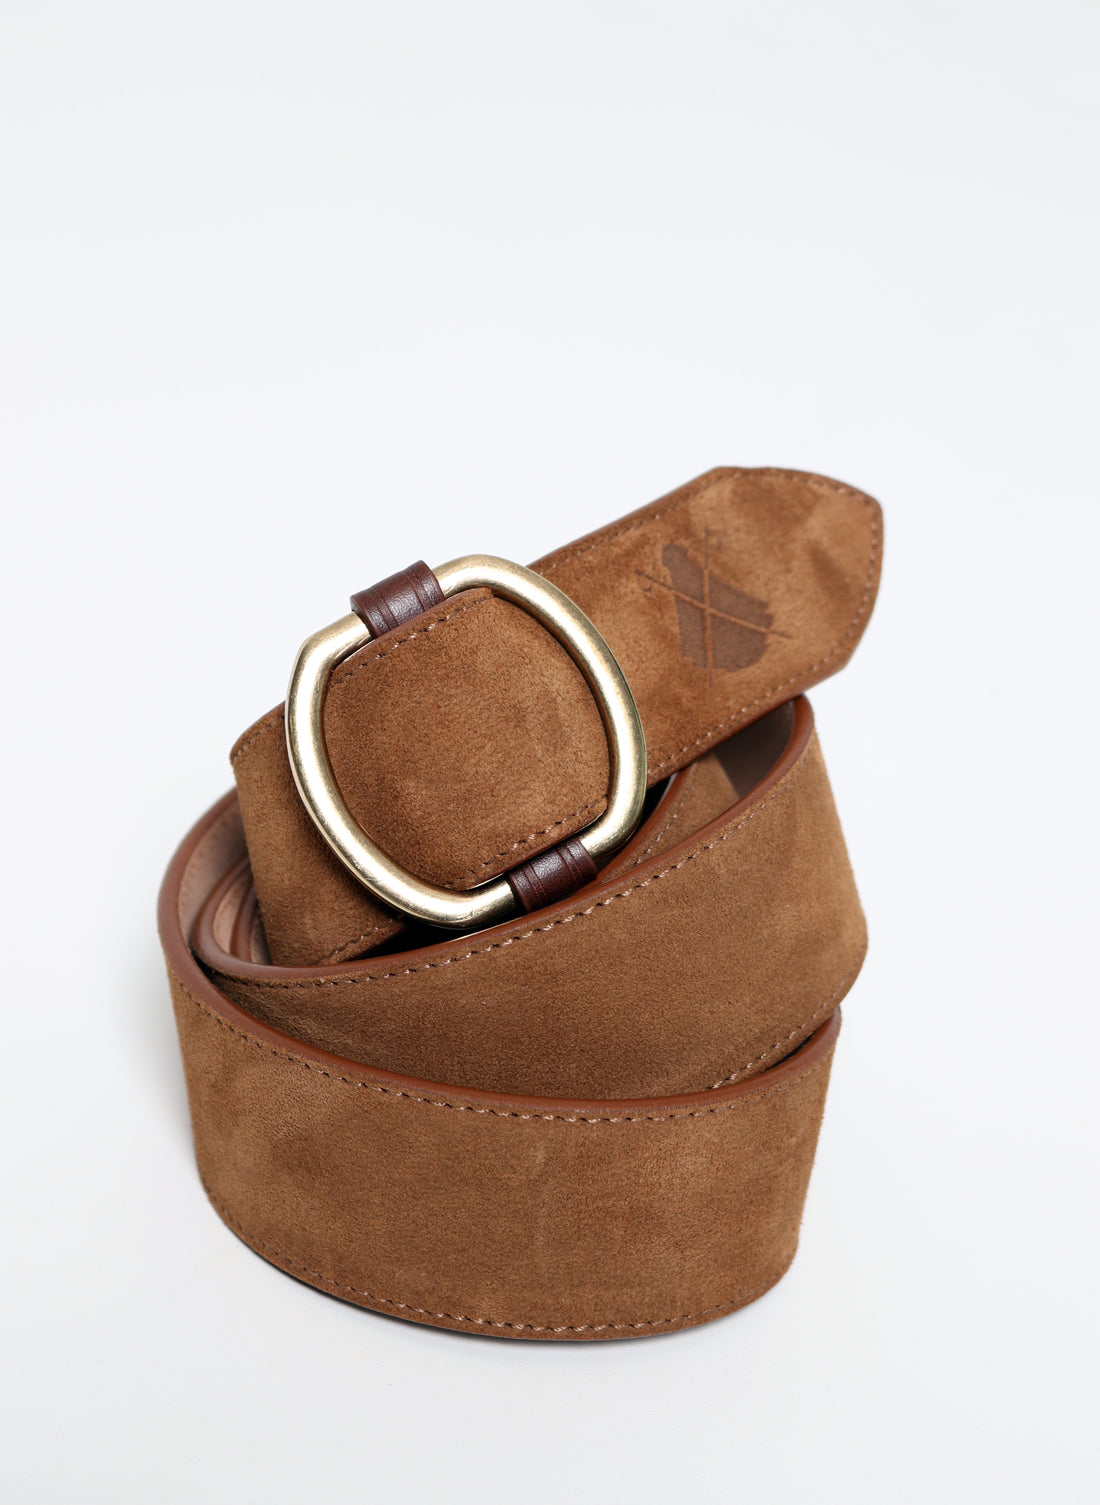 Ceinture in brown fendu leather with oval boucle